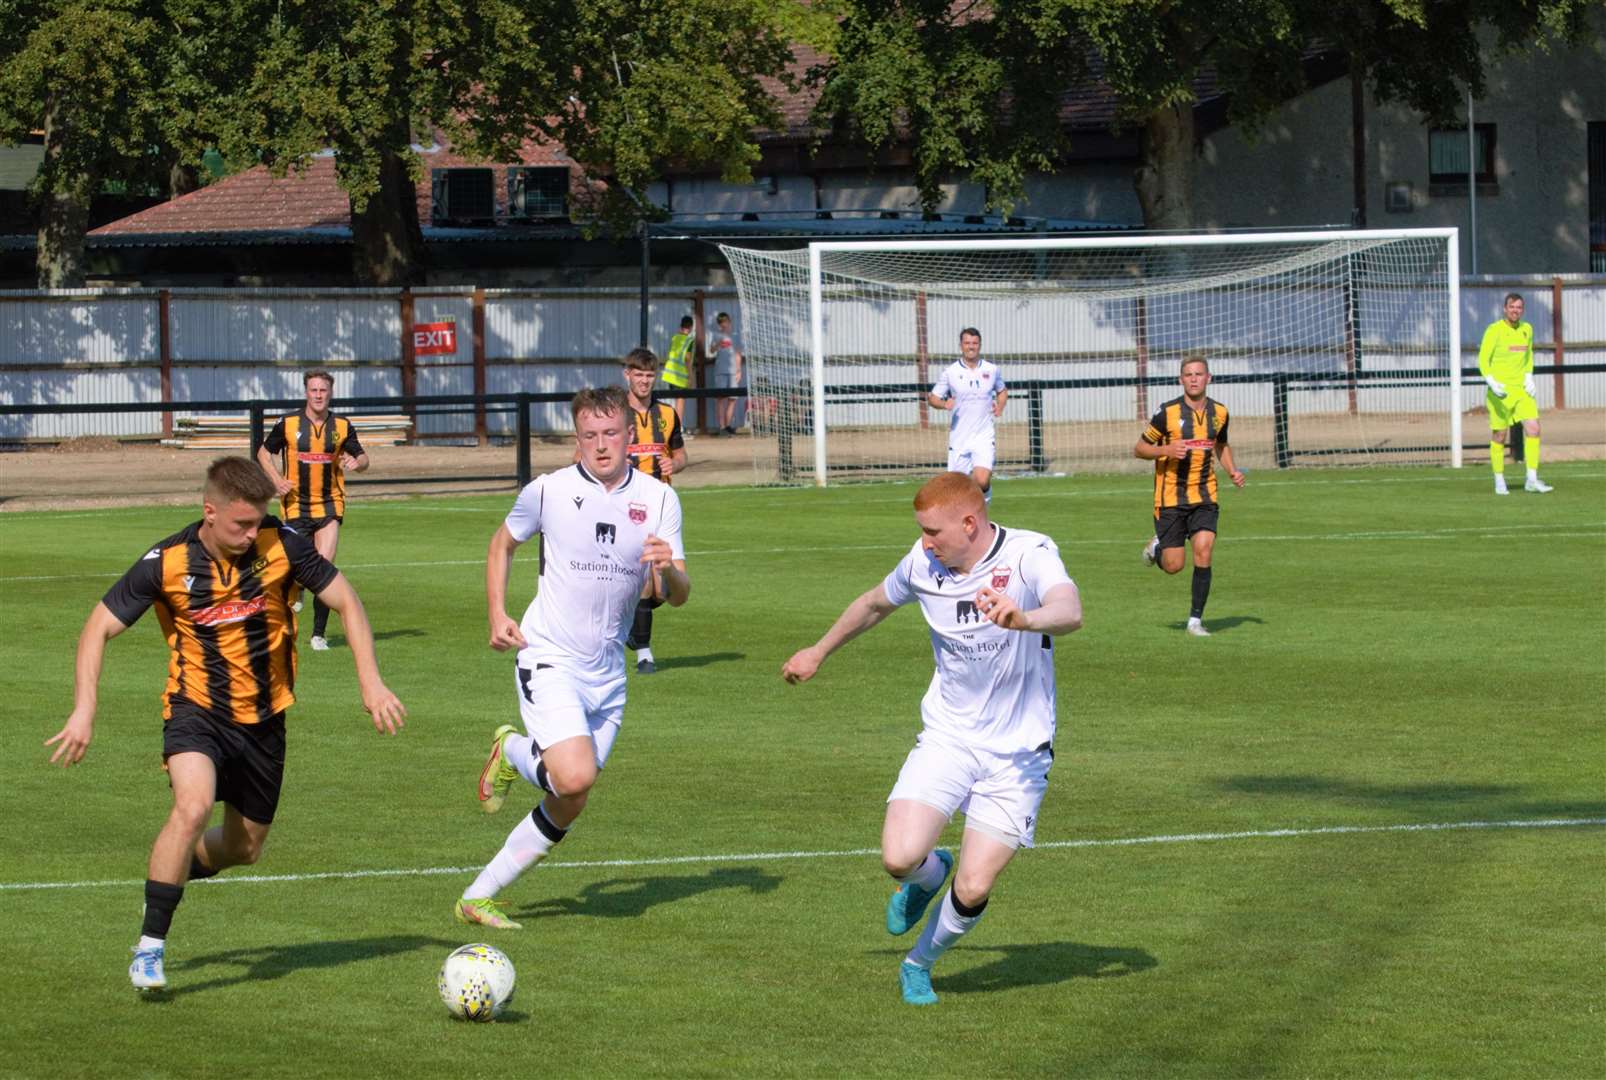 Angus Grant is back in full flow and scoring goals at Huntly. Picture: Derek Lowe